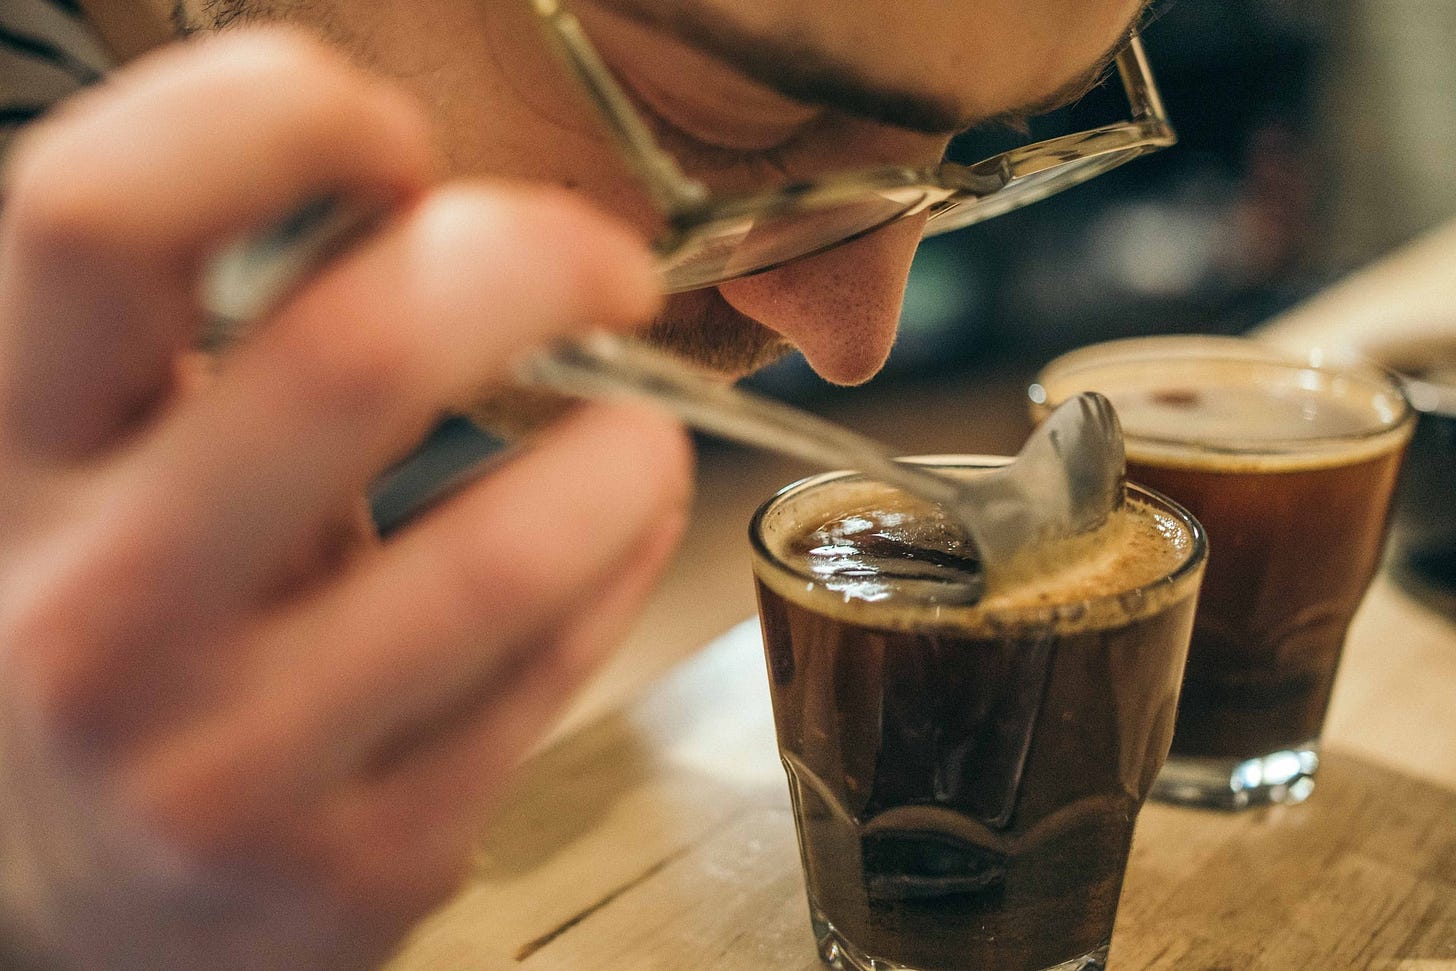 A close up image of a white man with glasses using a spoon dipped into a small bowl of coffee close to his nose while participating in a traditional coffee cupping tasting exercise.